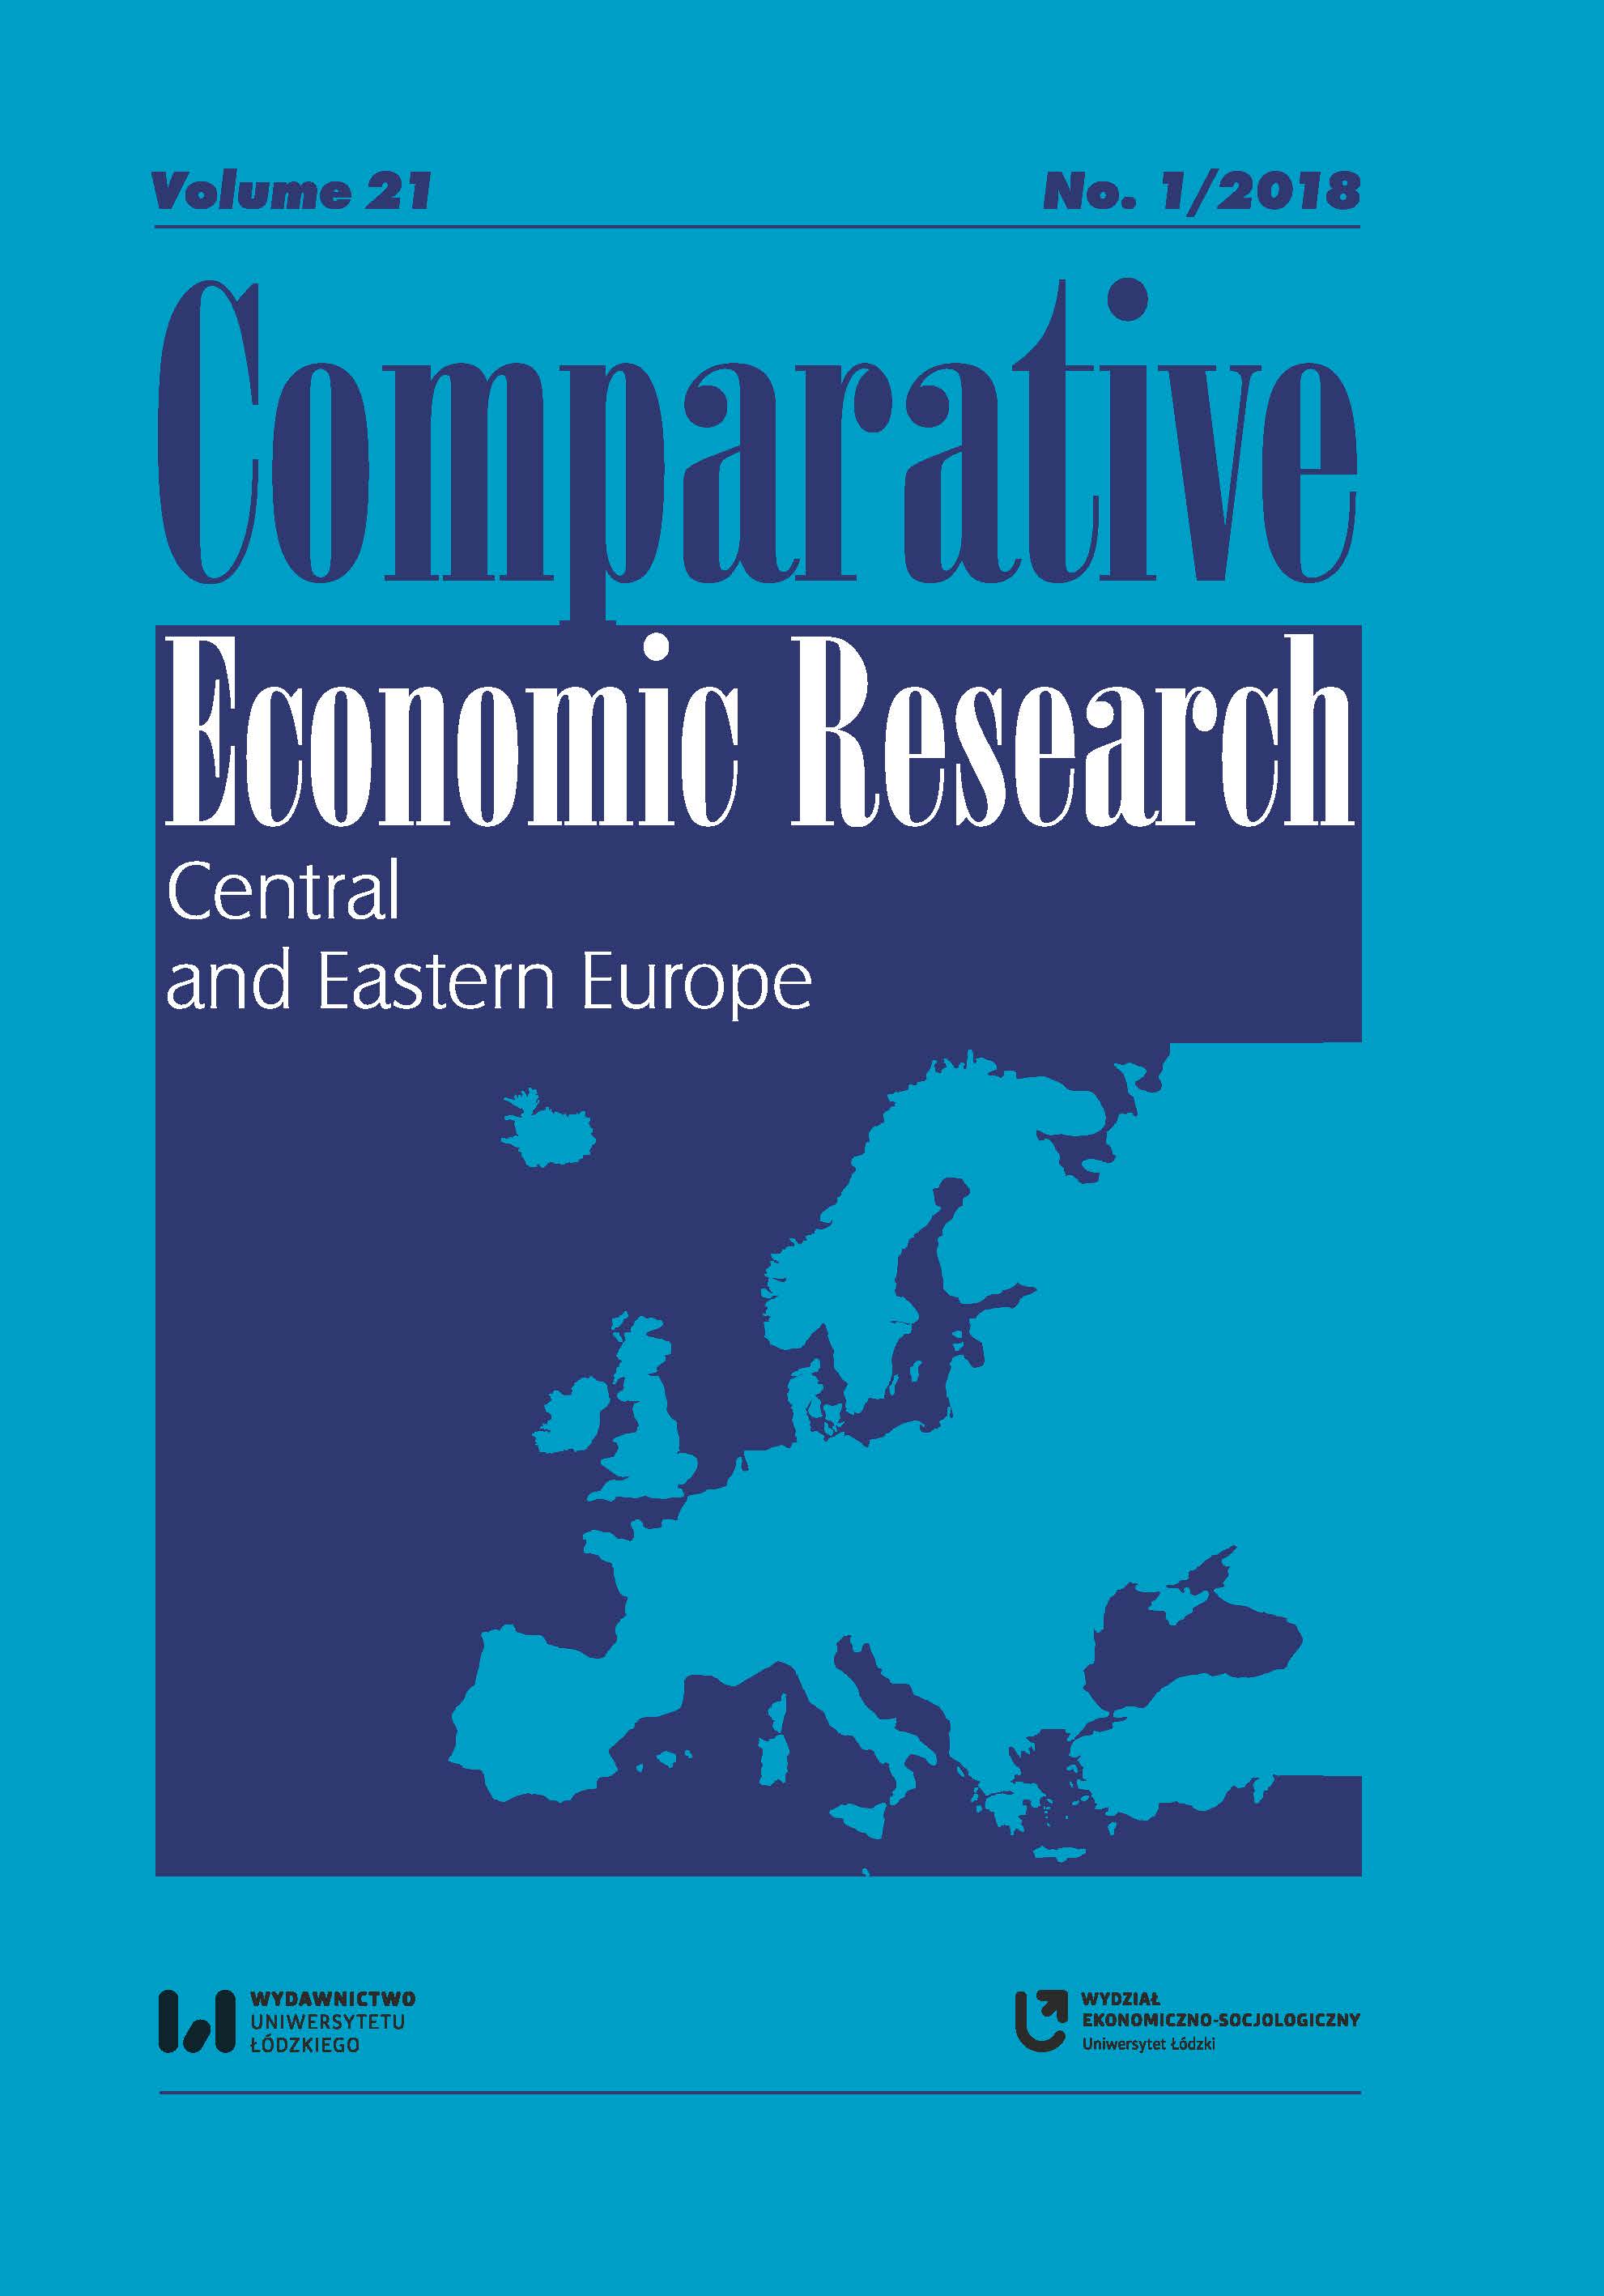 Towards the Goals of the Europe 2020 Strategy: Convergence or Divergence of the European Union Countries?